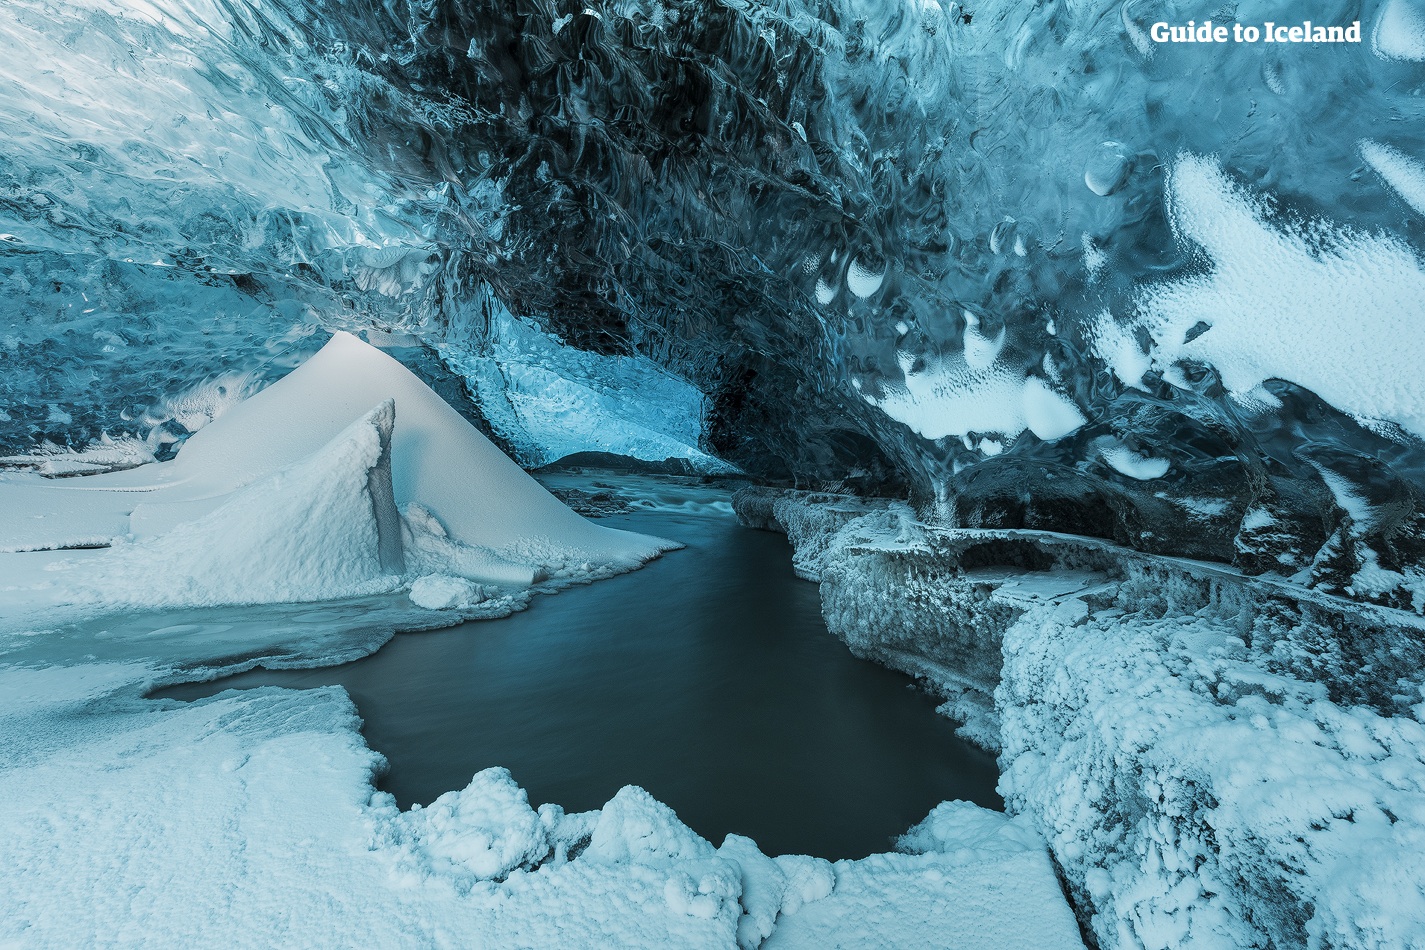 From November to March, the ice caves of Vatnajökull are safe enough for visitors to enter and marvel over.